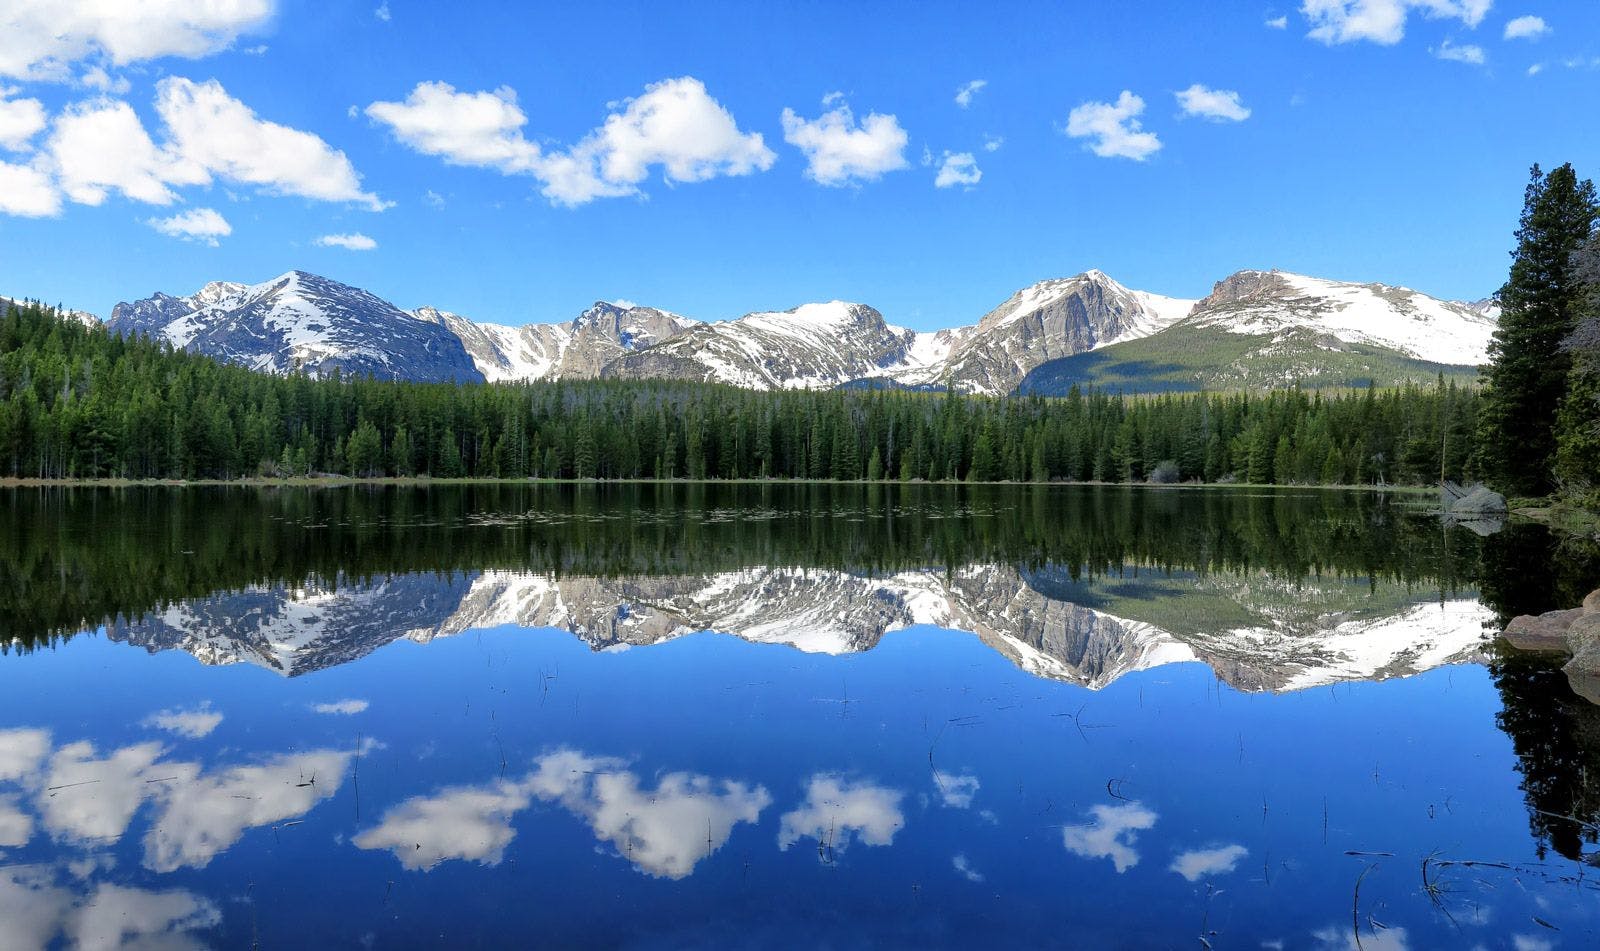 Colorado mountain landscape with a still lake reflecting the forest and mountains